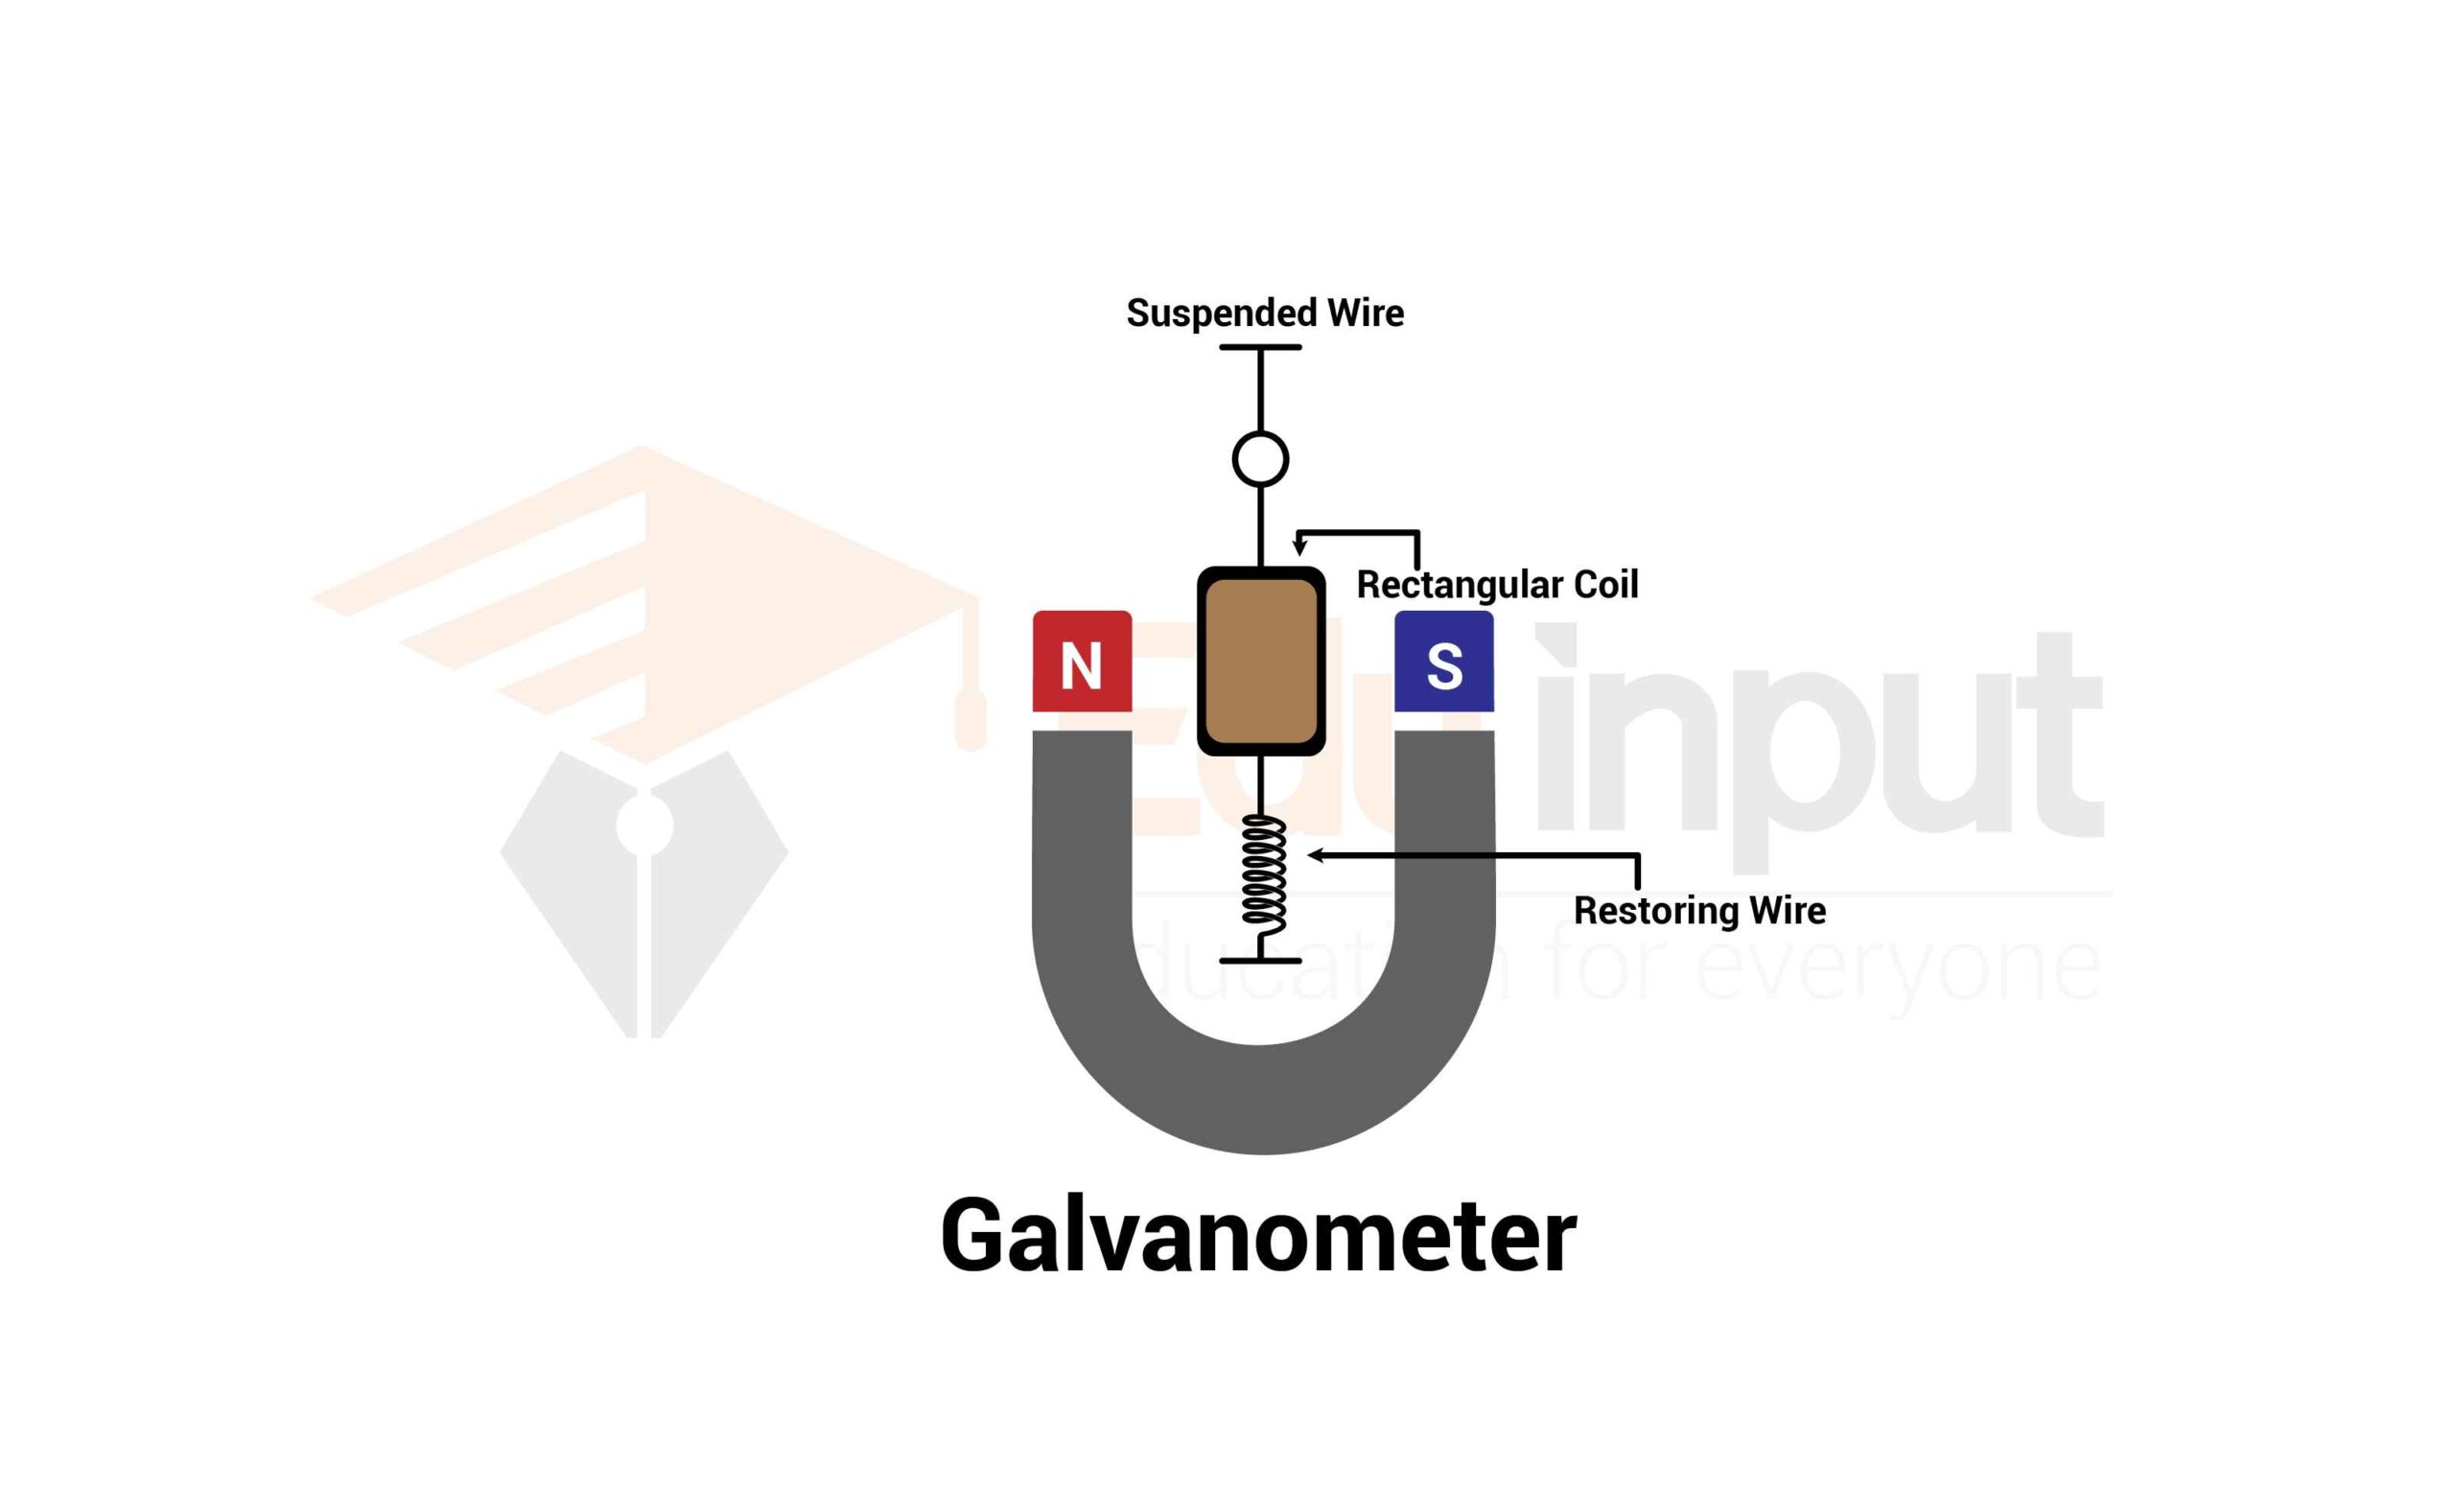 Galvanometer-Definition, Working, and Construction